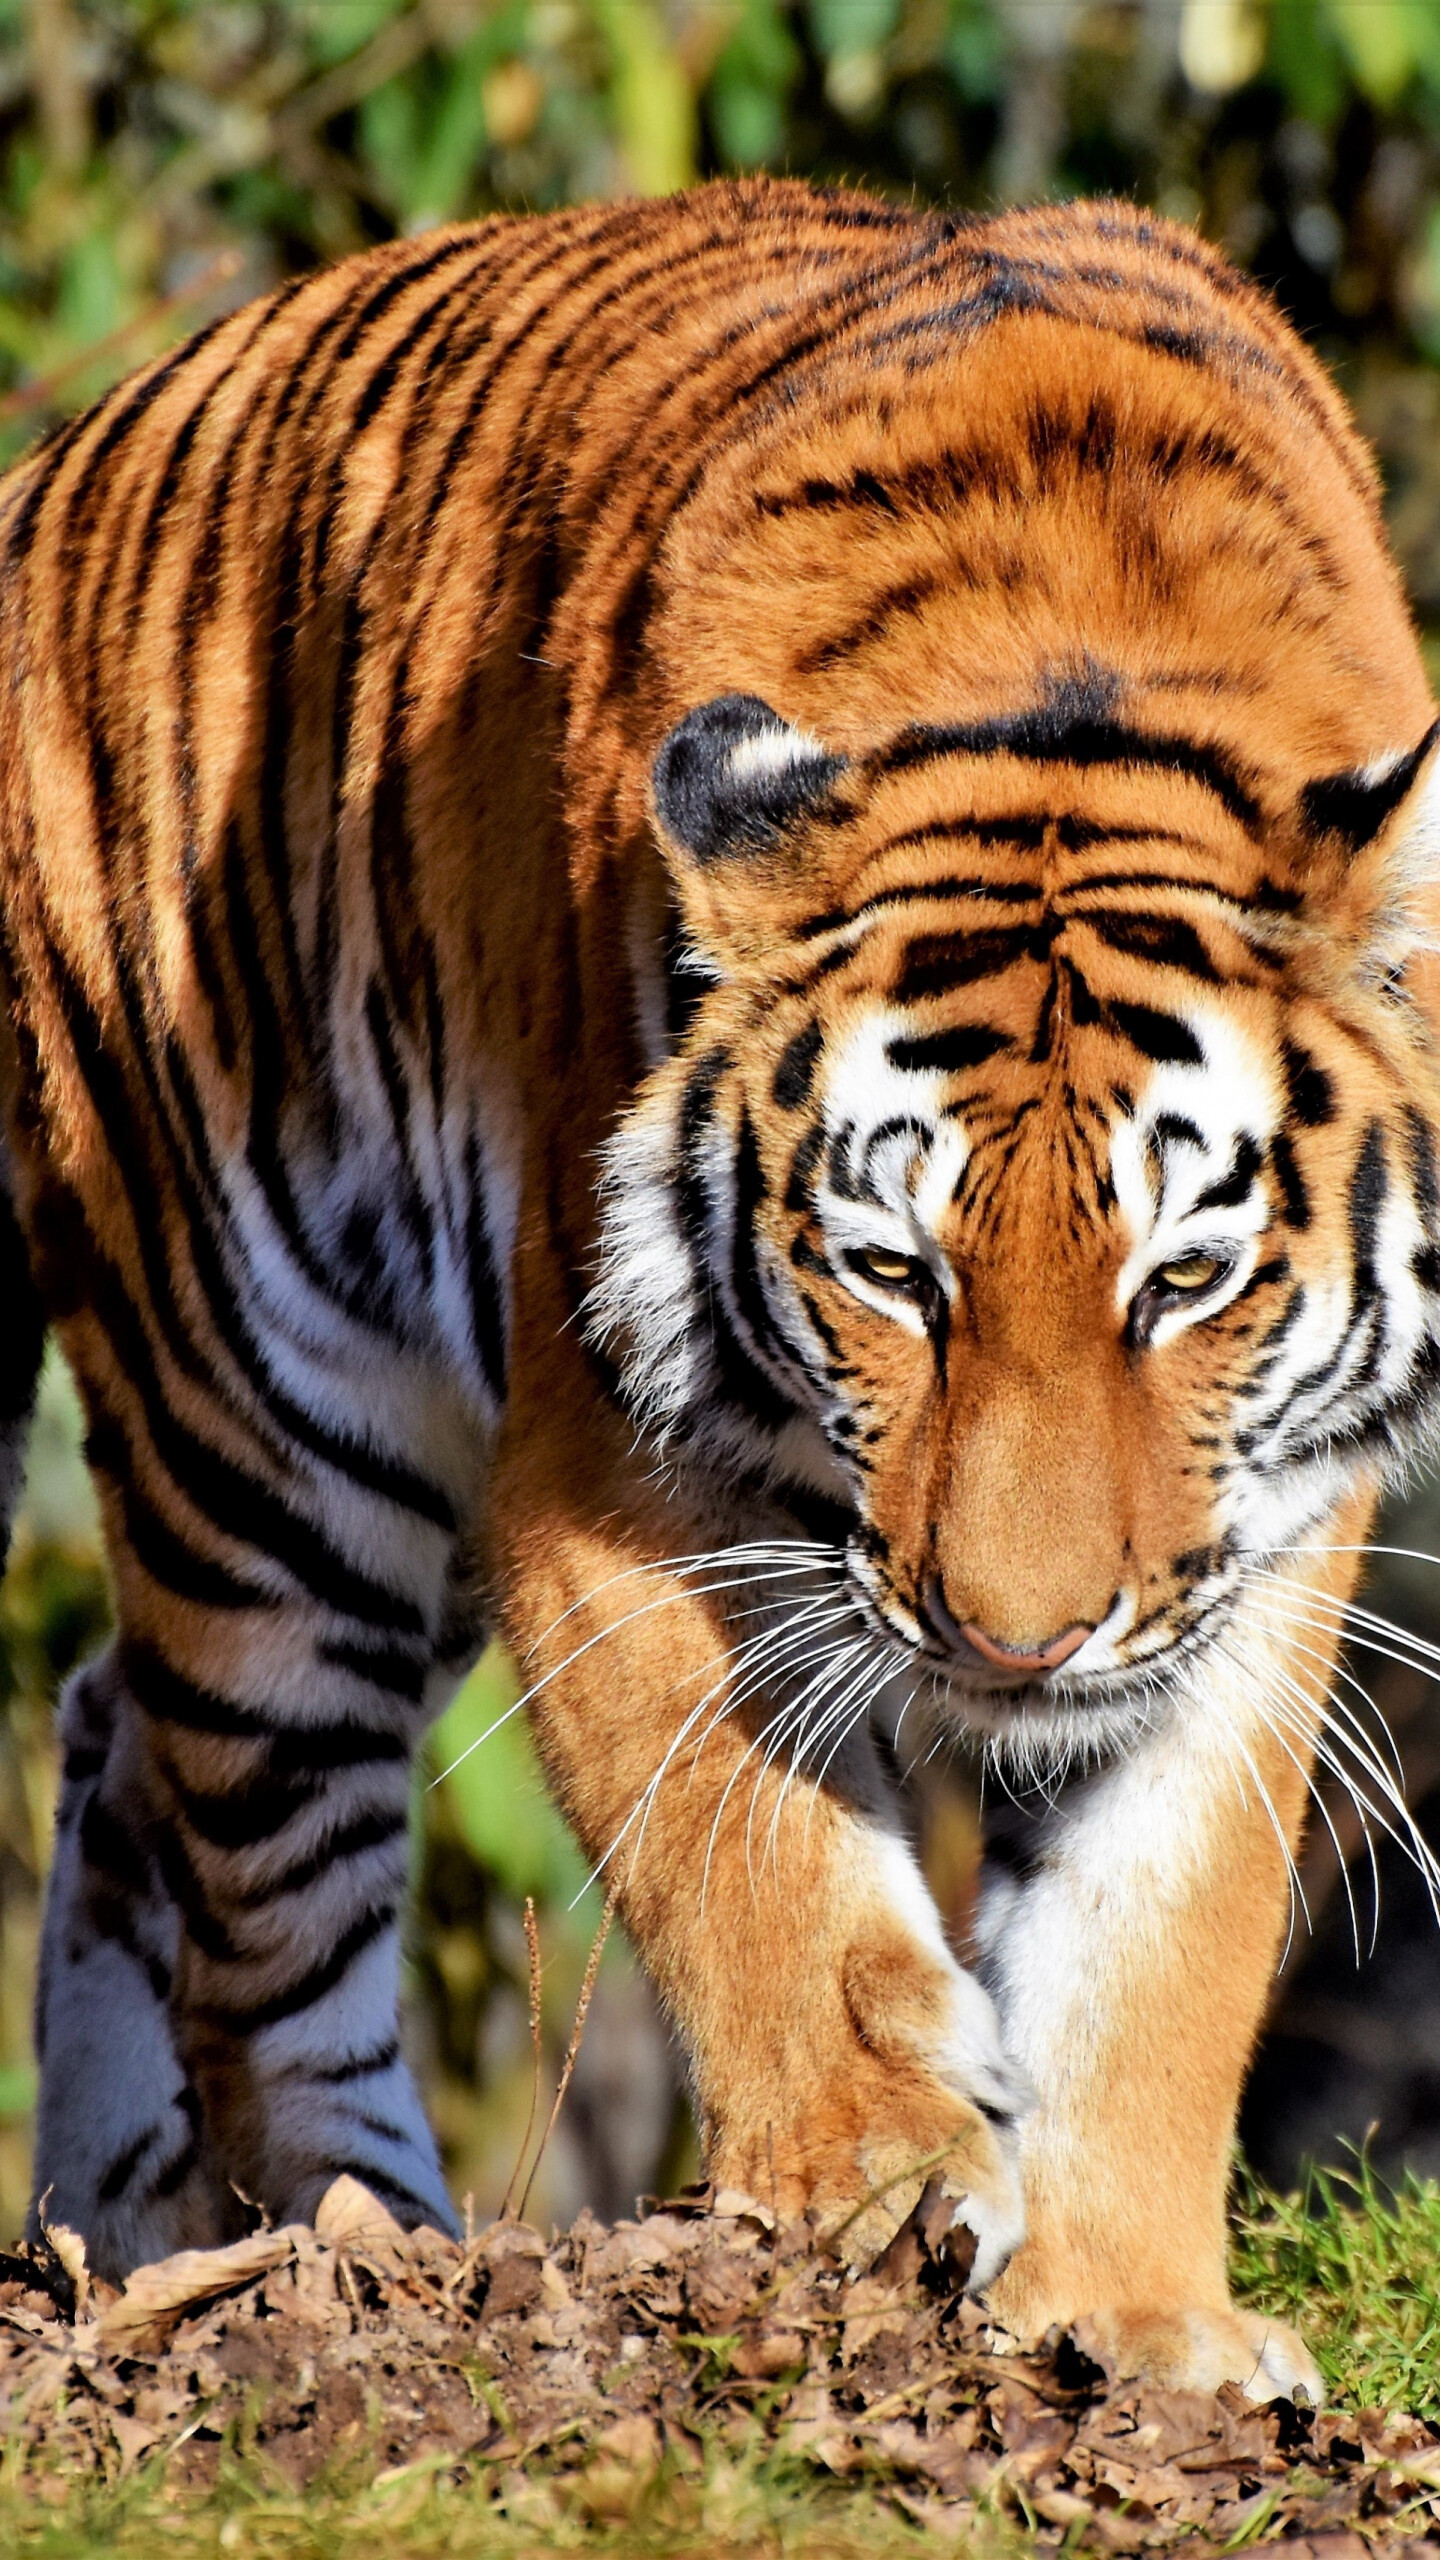 Tiger: The largest of all the Asian big cats, tigers rely primarily on sight and sound rather than smell for hunting. 1440x2560 HD Wallpaper.